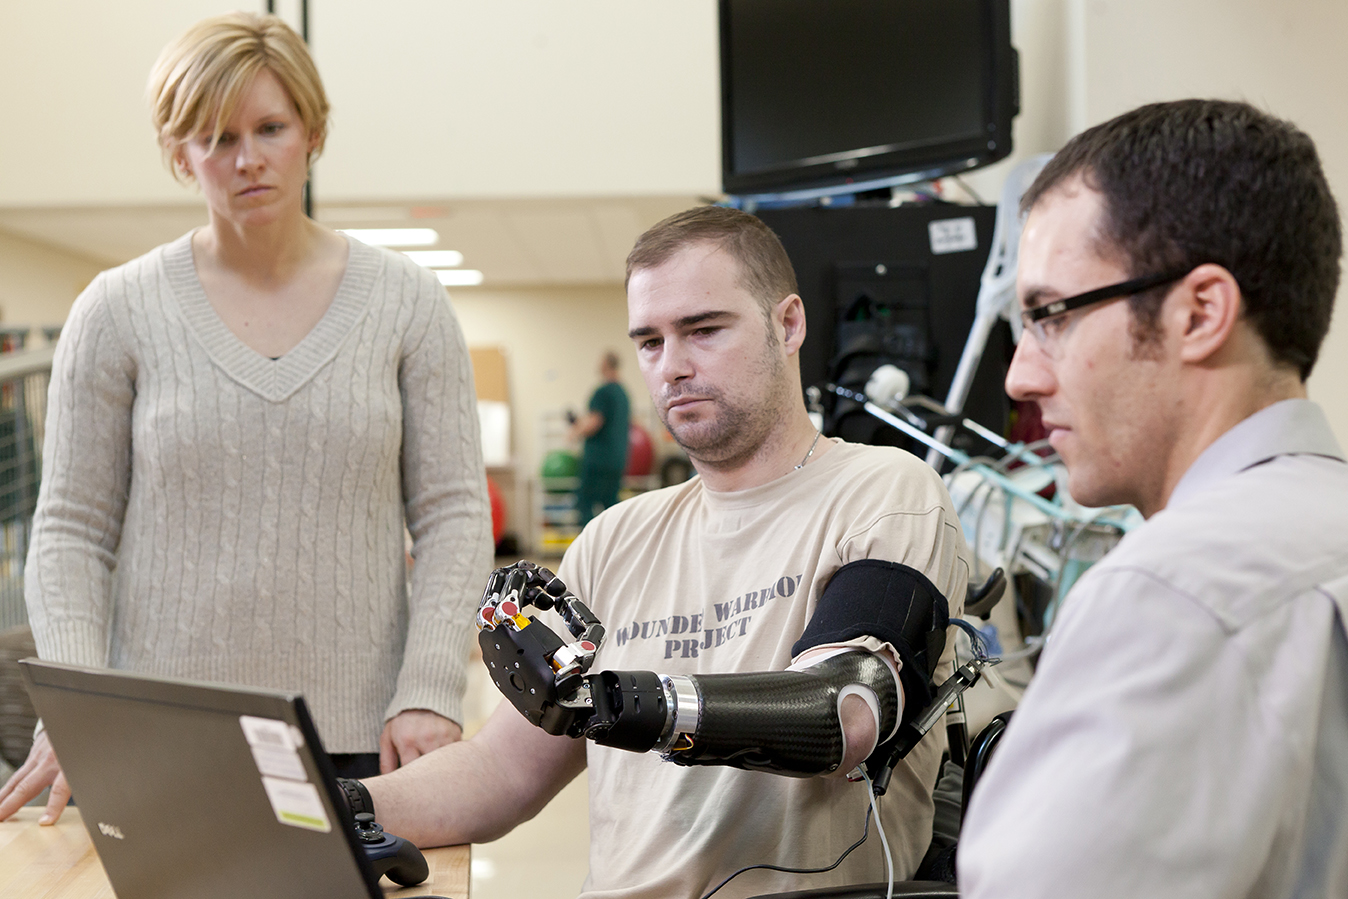 APL engineers Courtney Moran (left) and Bobby Armiger (far right) work with Technical Sergeant Joe Delauriers as he controls the Modular Prosthetic Limb (MPL) at Walter Reed National Medical Center.